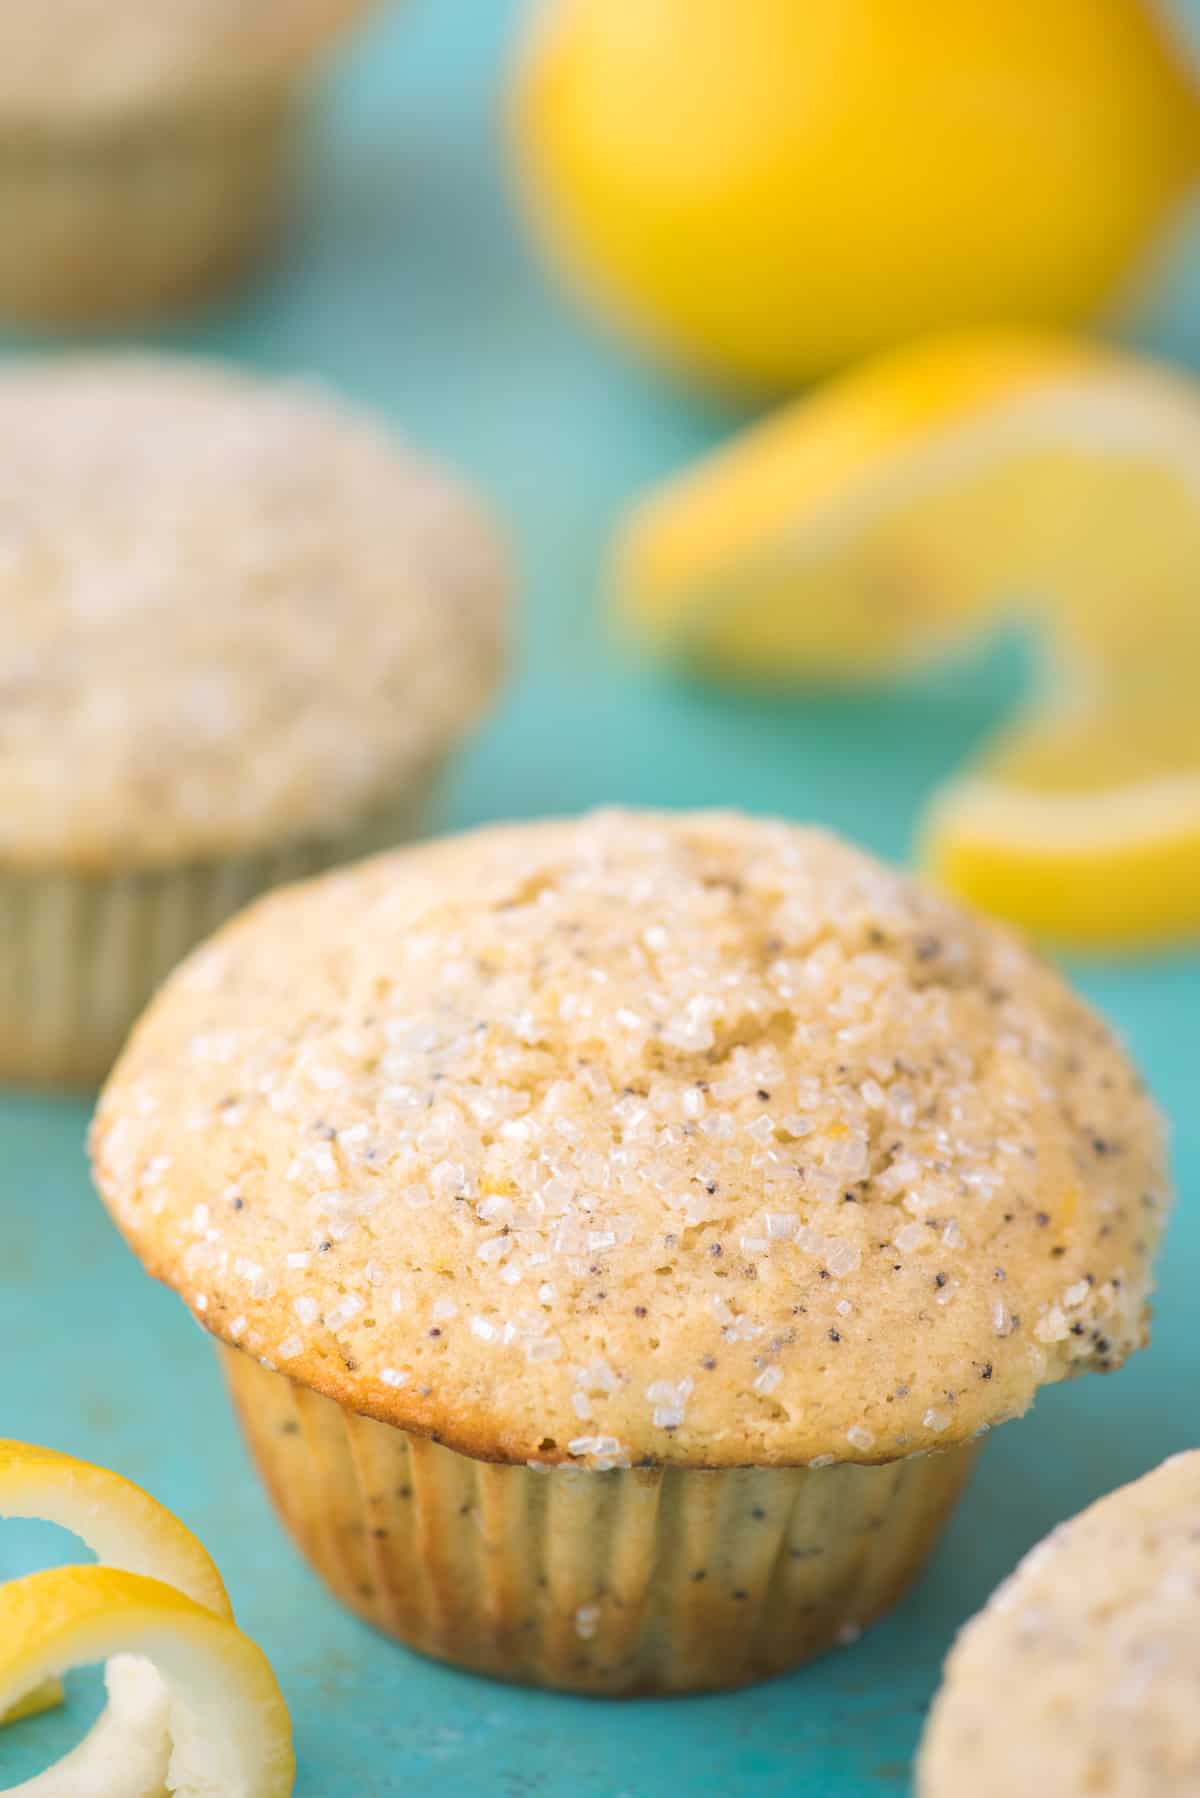 lemon poppy seed muffin on teal background with lemon slices